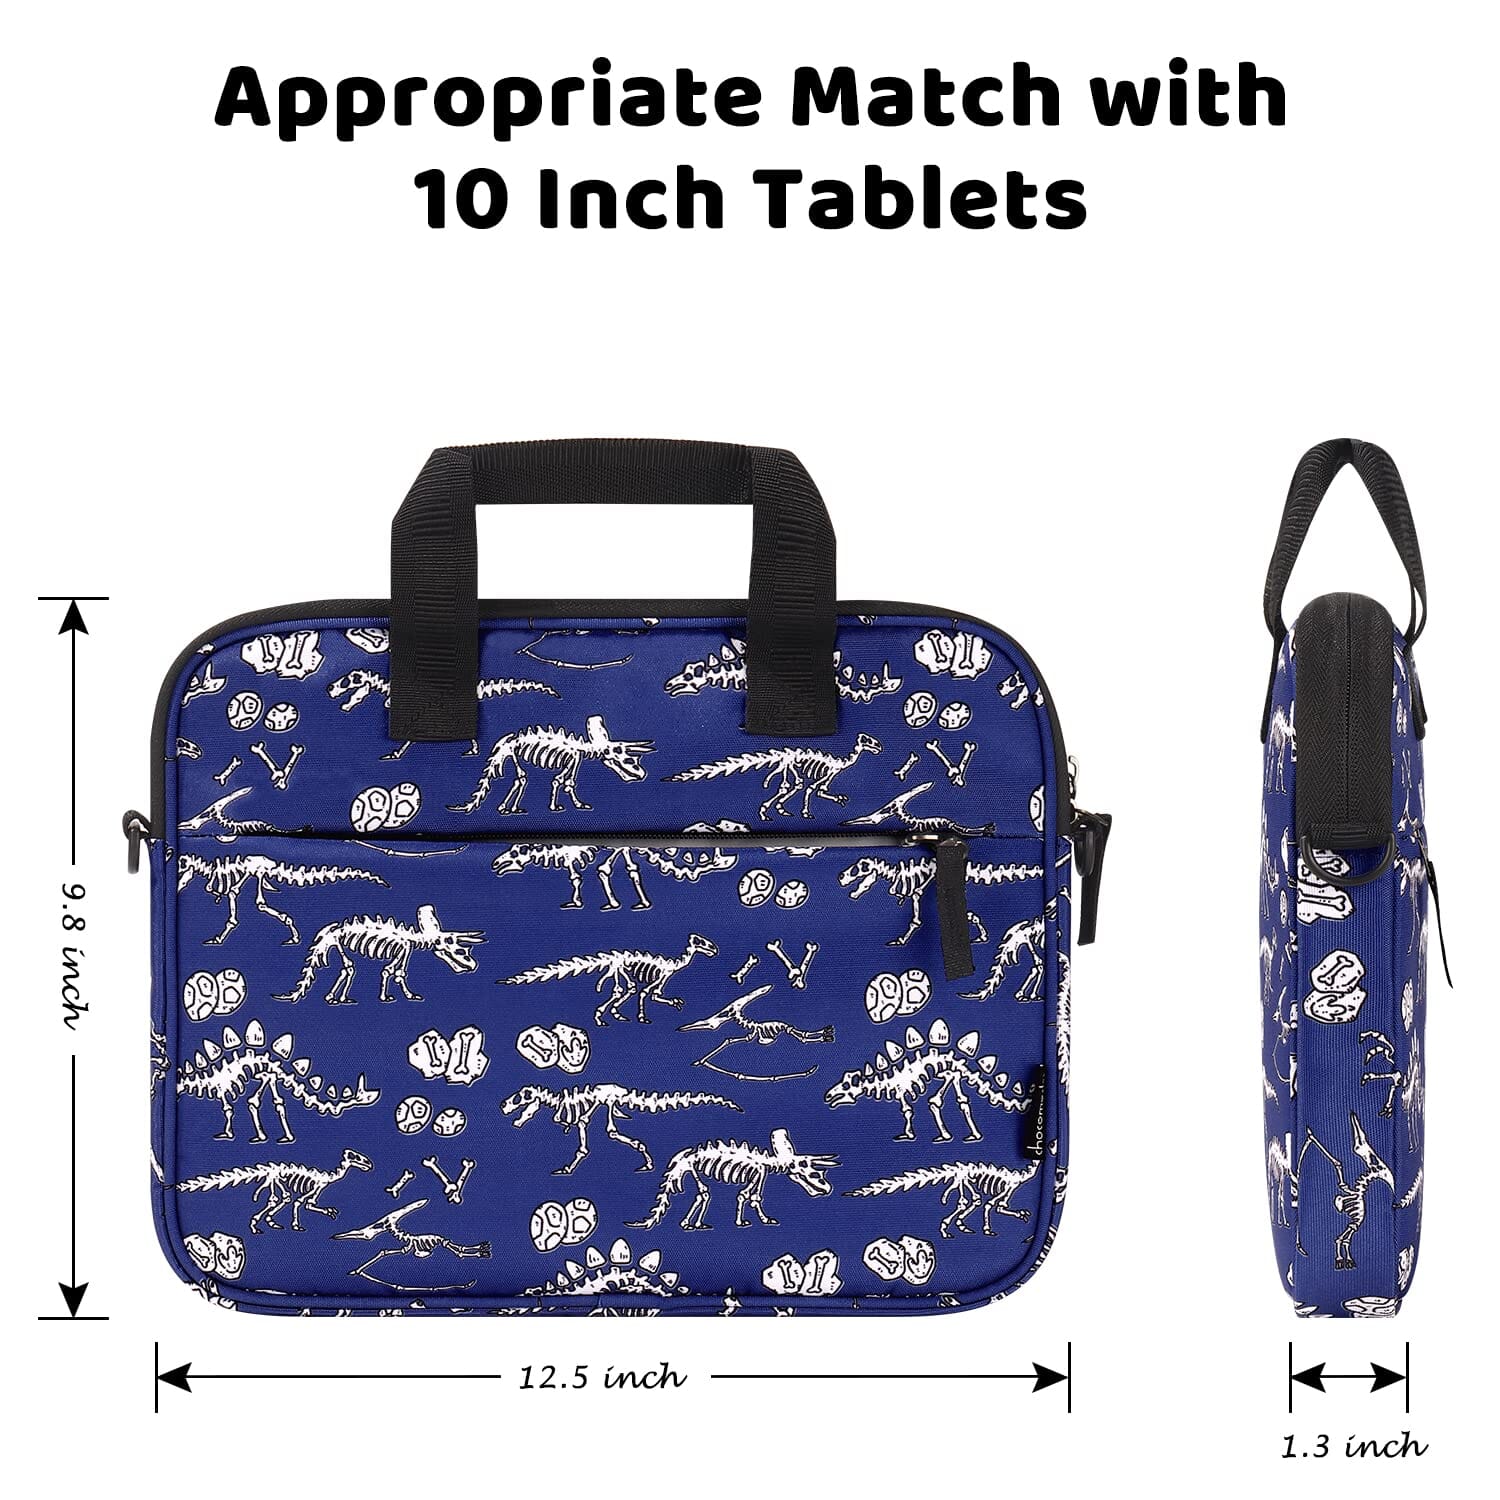 Choco Mocha 12.5 Inch Kids Dinosaur Tablet Sleeve Bag for Boys, Kids Tablet Carrying Case for Fire HD 10, Fire 7, Fire HD 8, Fire 10 Tablet, Kindle Kids Edition, Apple iPad, Navy chocomochakids 